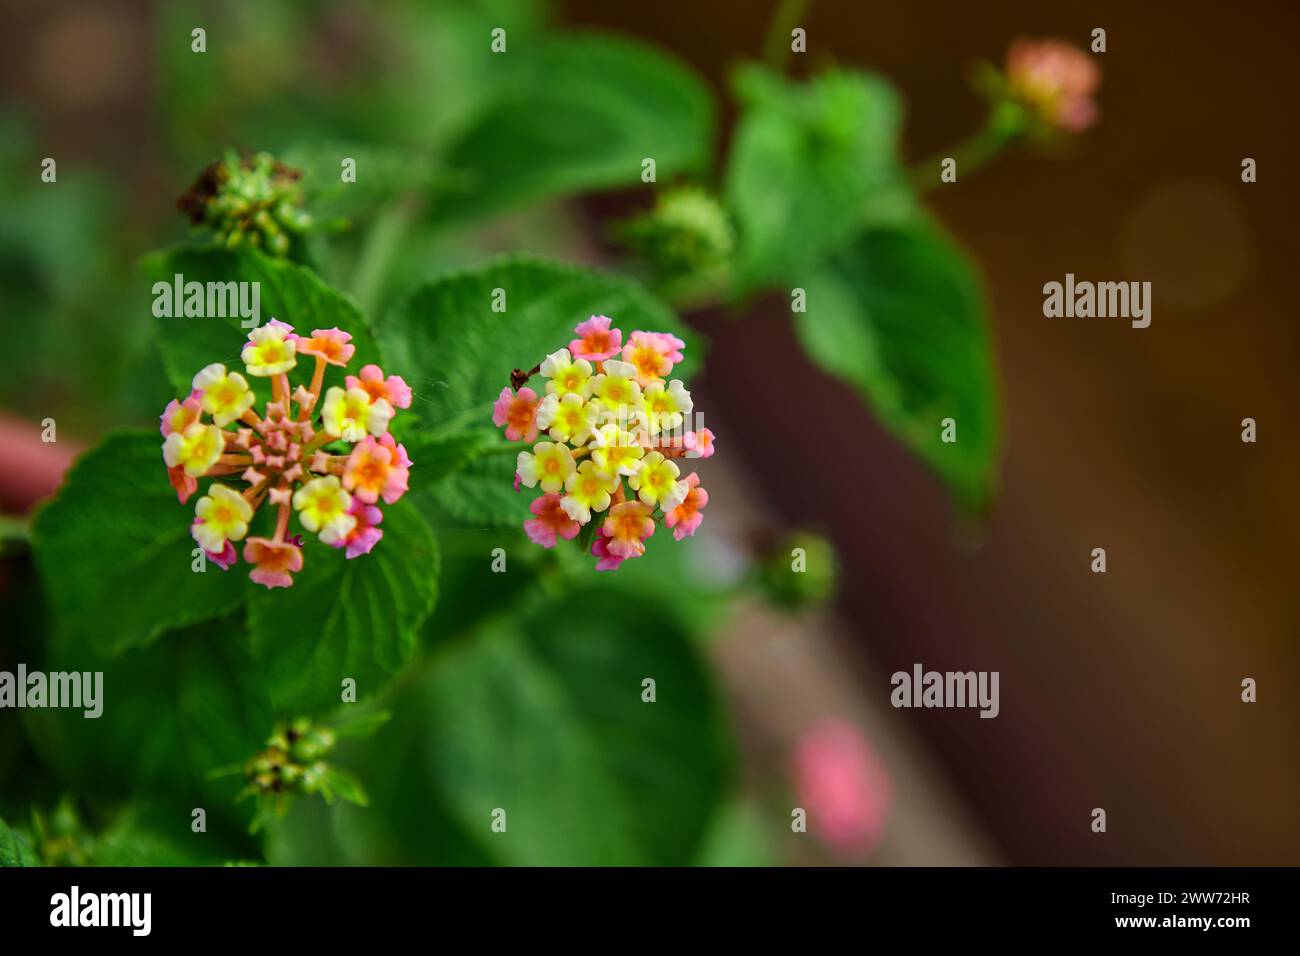 Close-up of Lantana flower blooming in garden Stock Photo